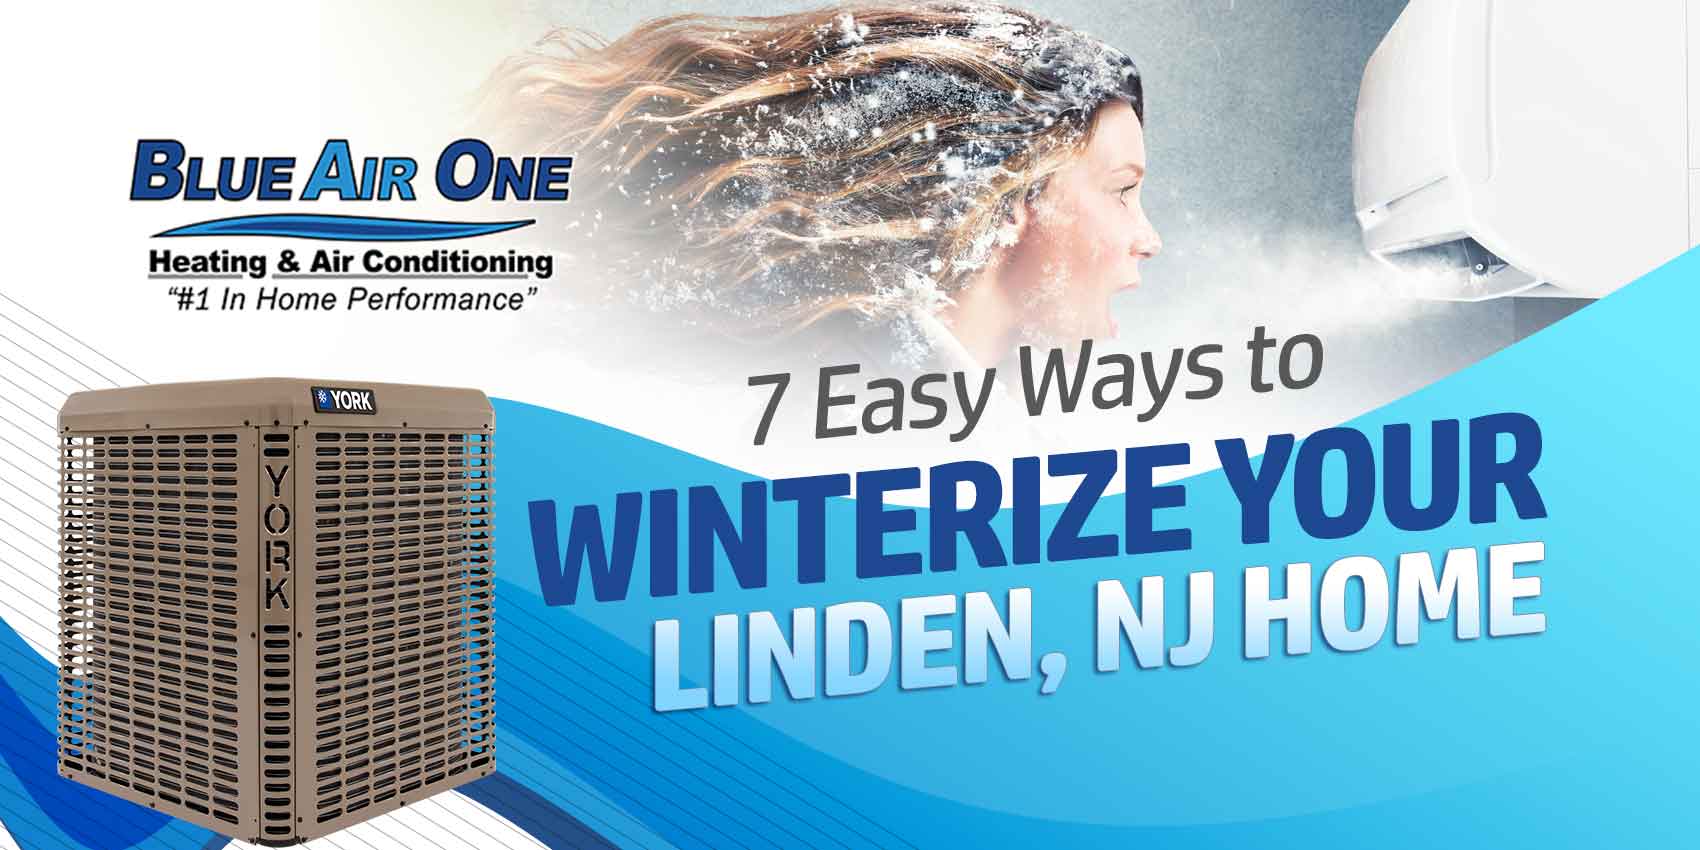 7 Easy Ways to Winterize Your Linden, NJ Home